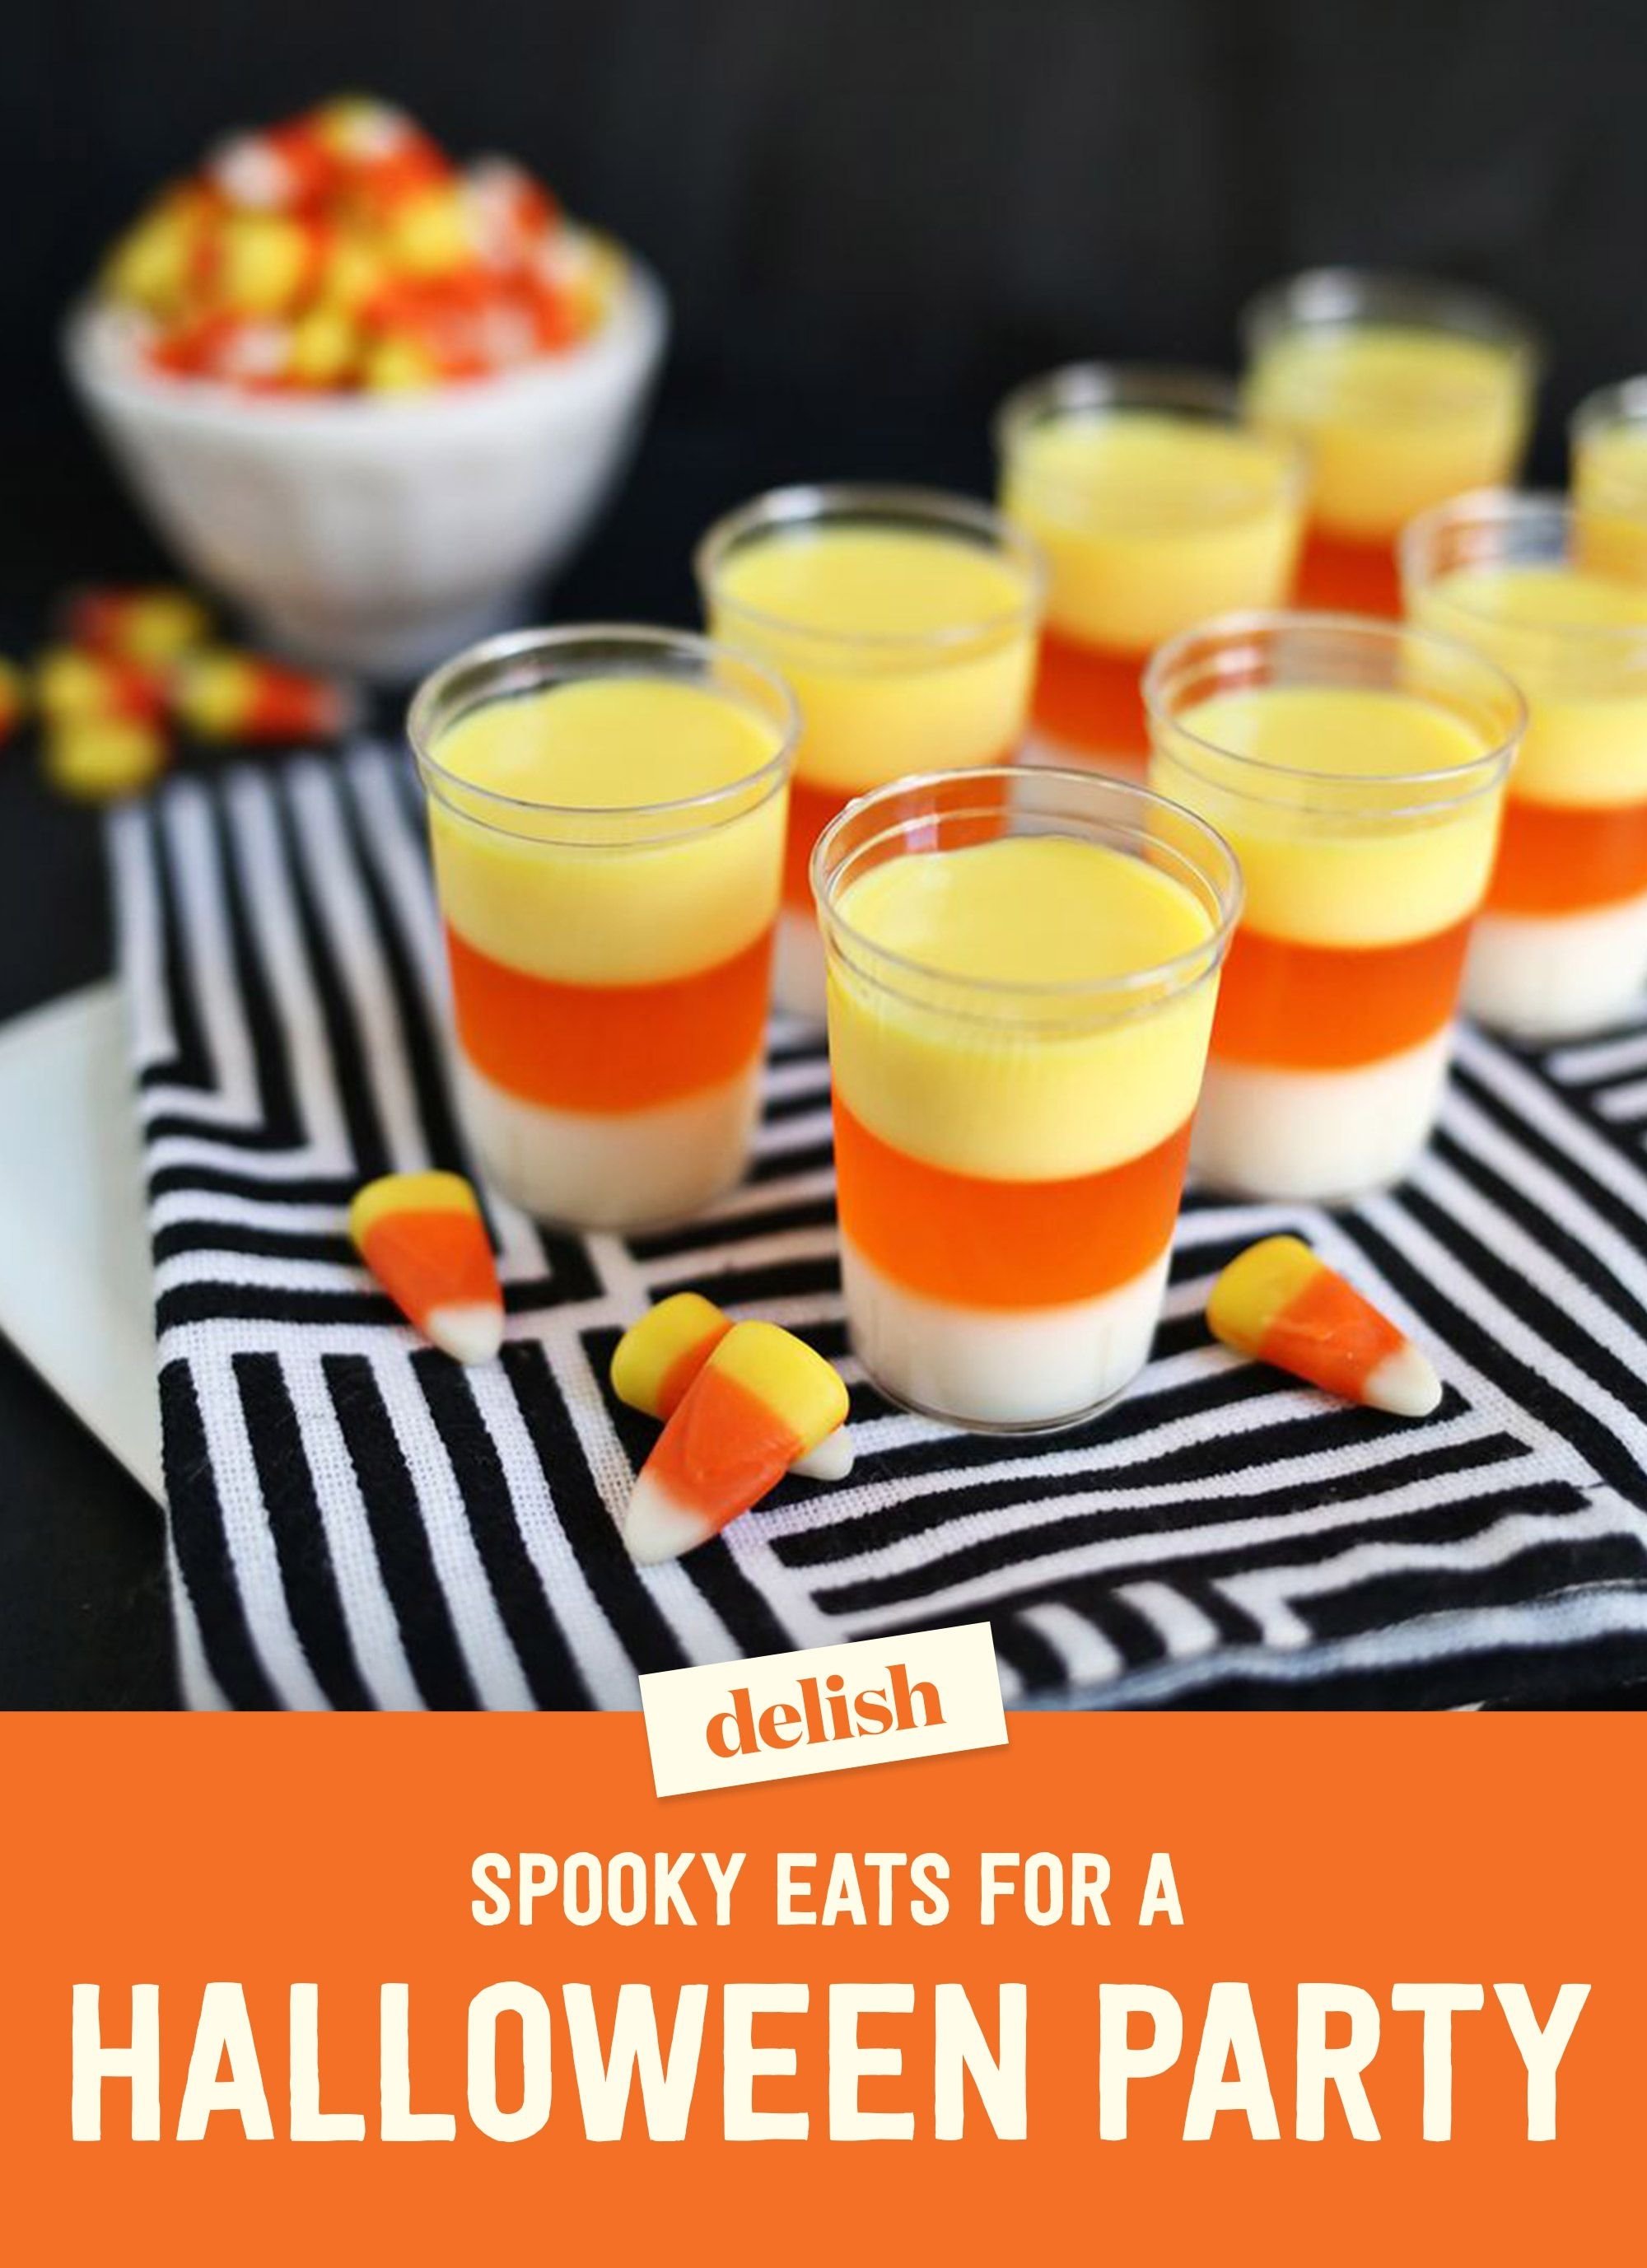 10 Unique Halloween Food Ideas For Adults Easy 40 adult halloween party ideas halloween food for adults delish 1 2022